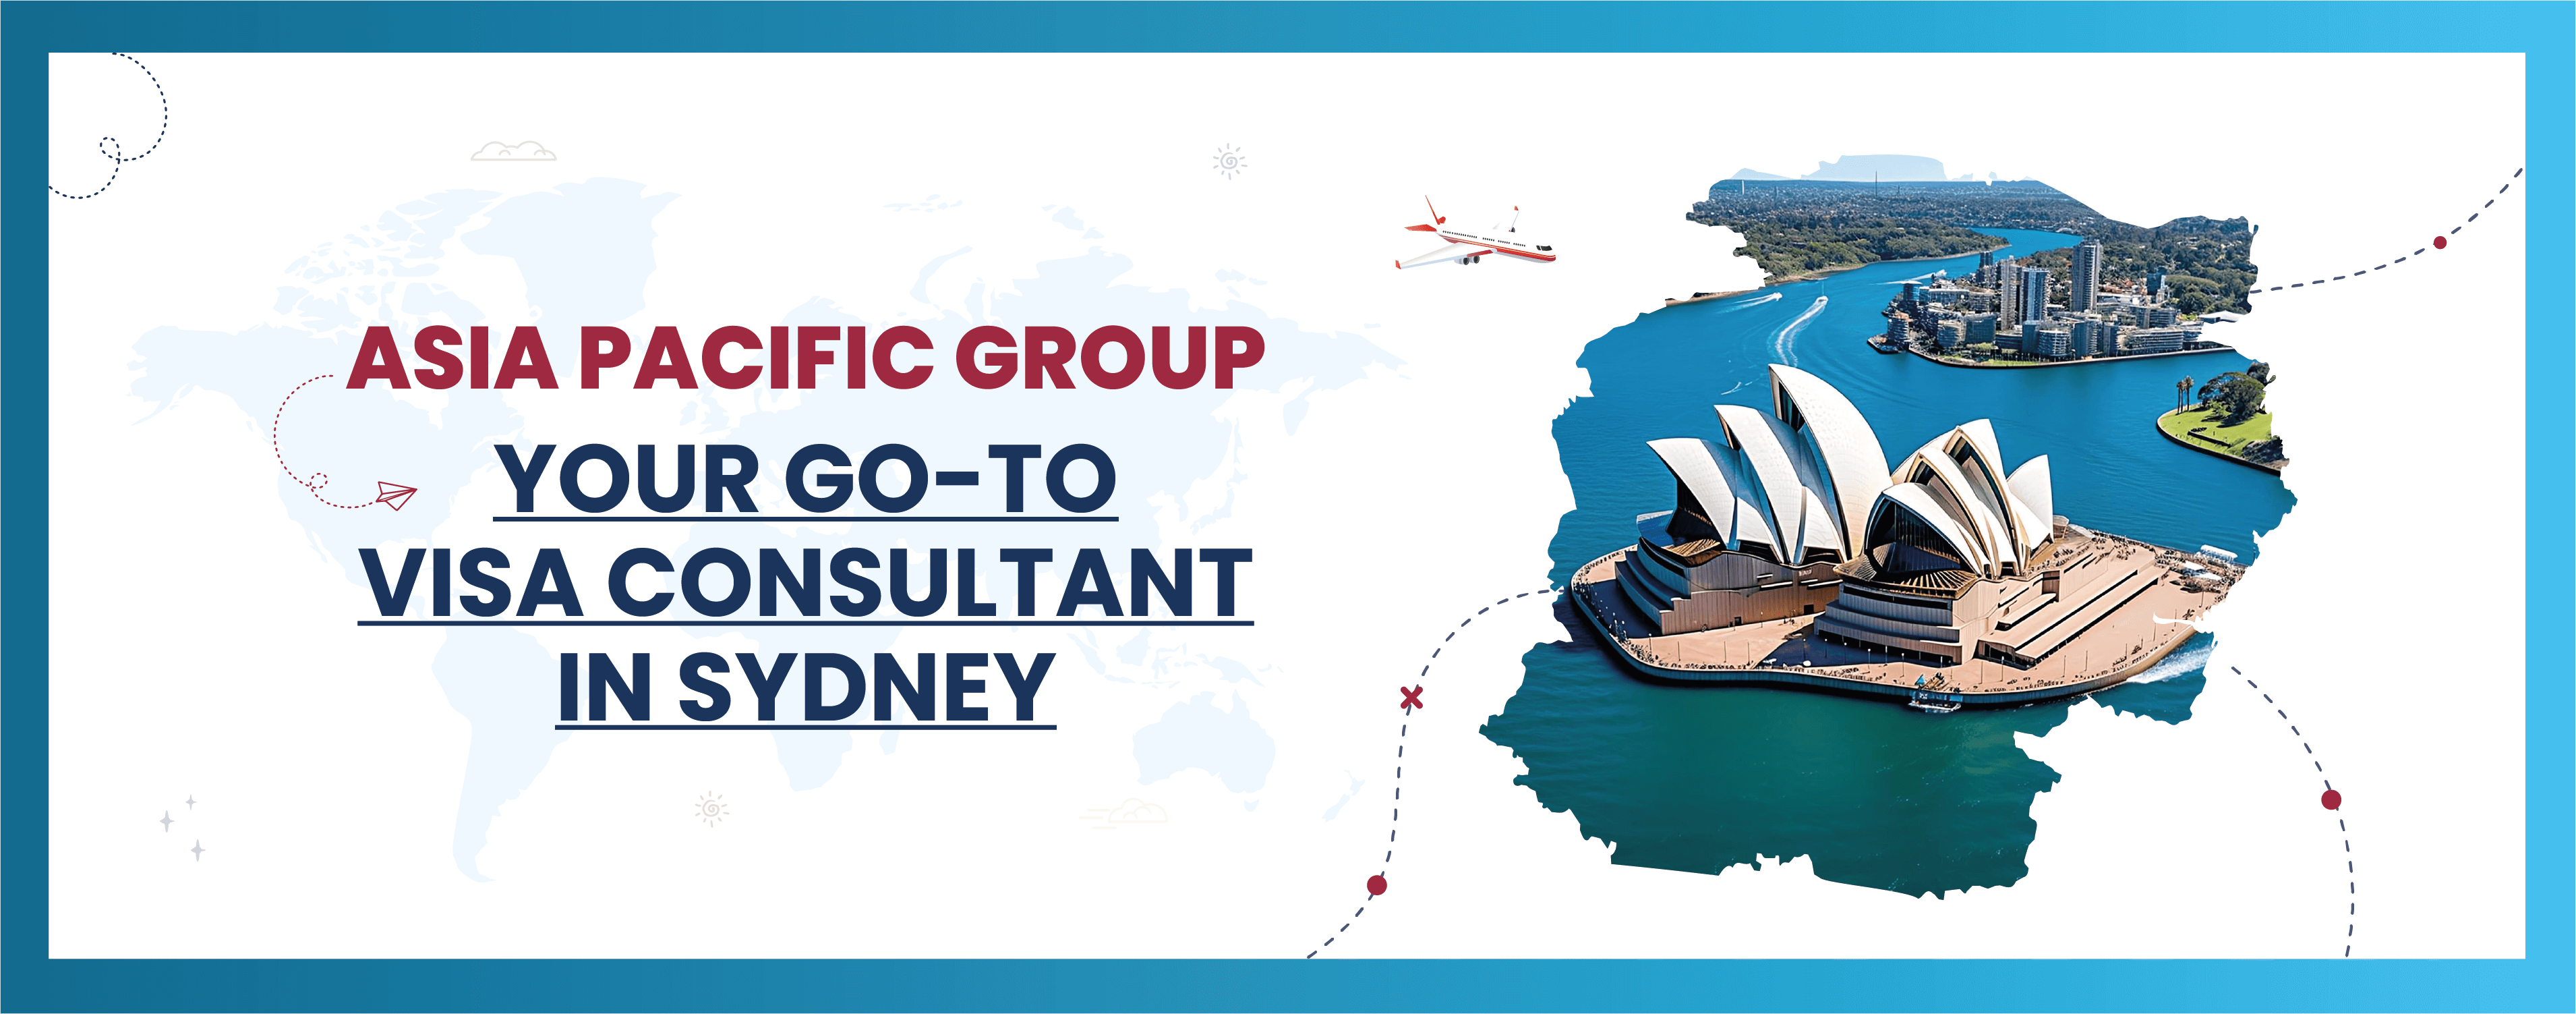 Asia Pacific Group – Your Go-To Visa Consultant in Sydney